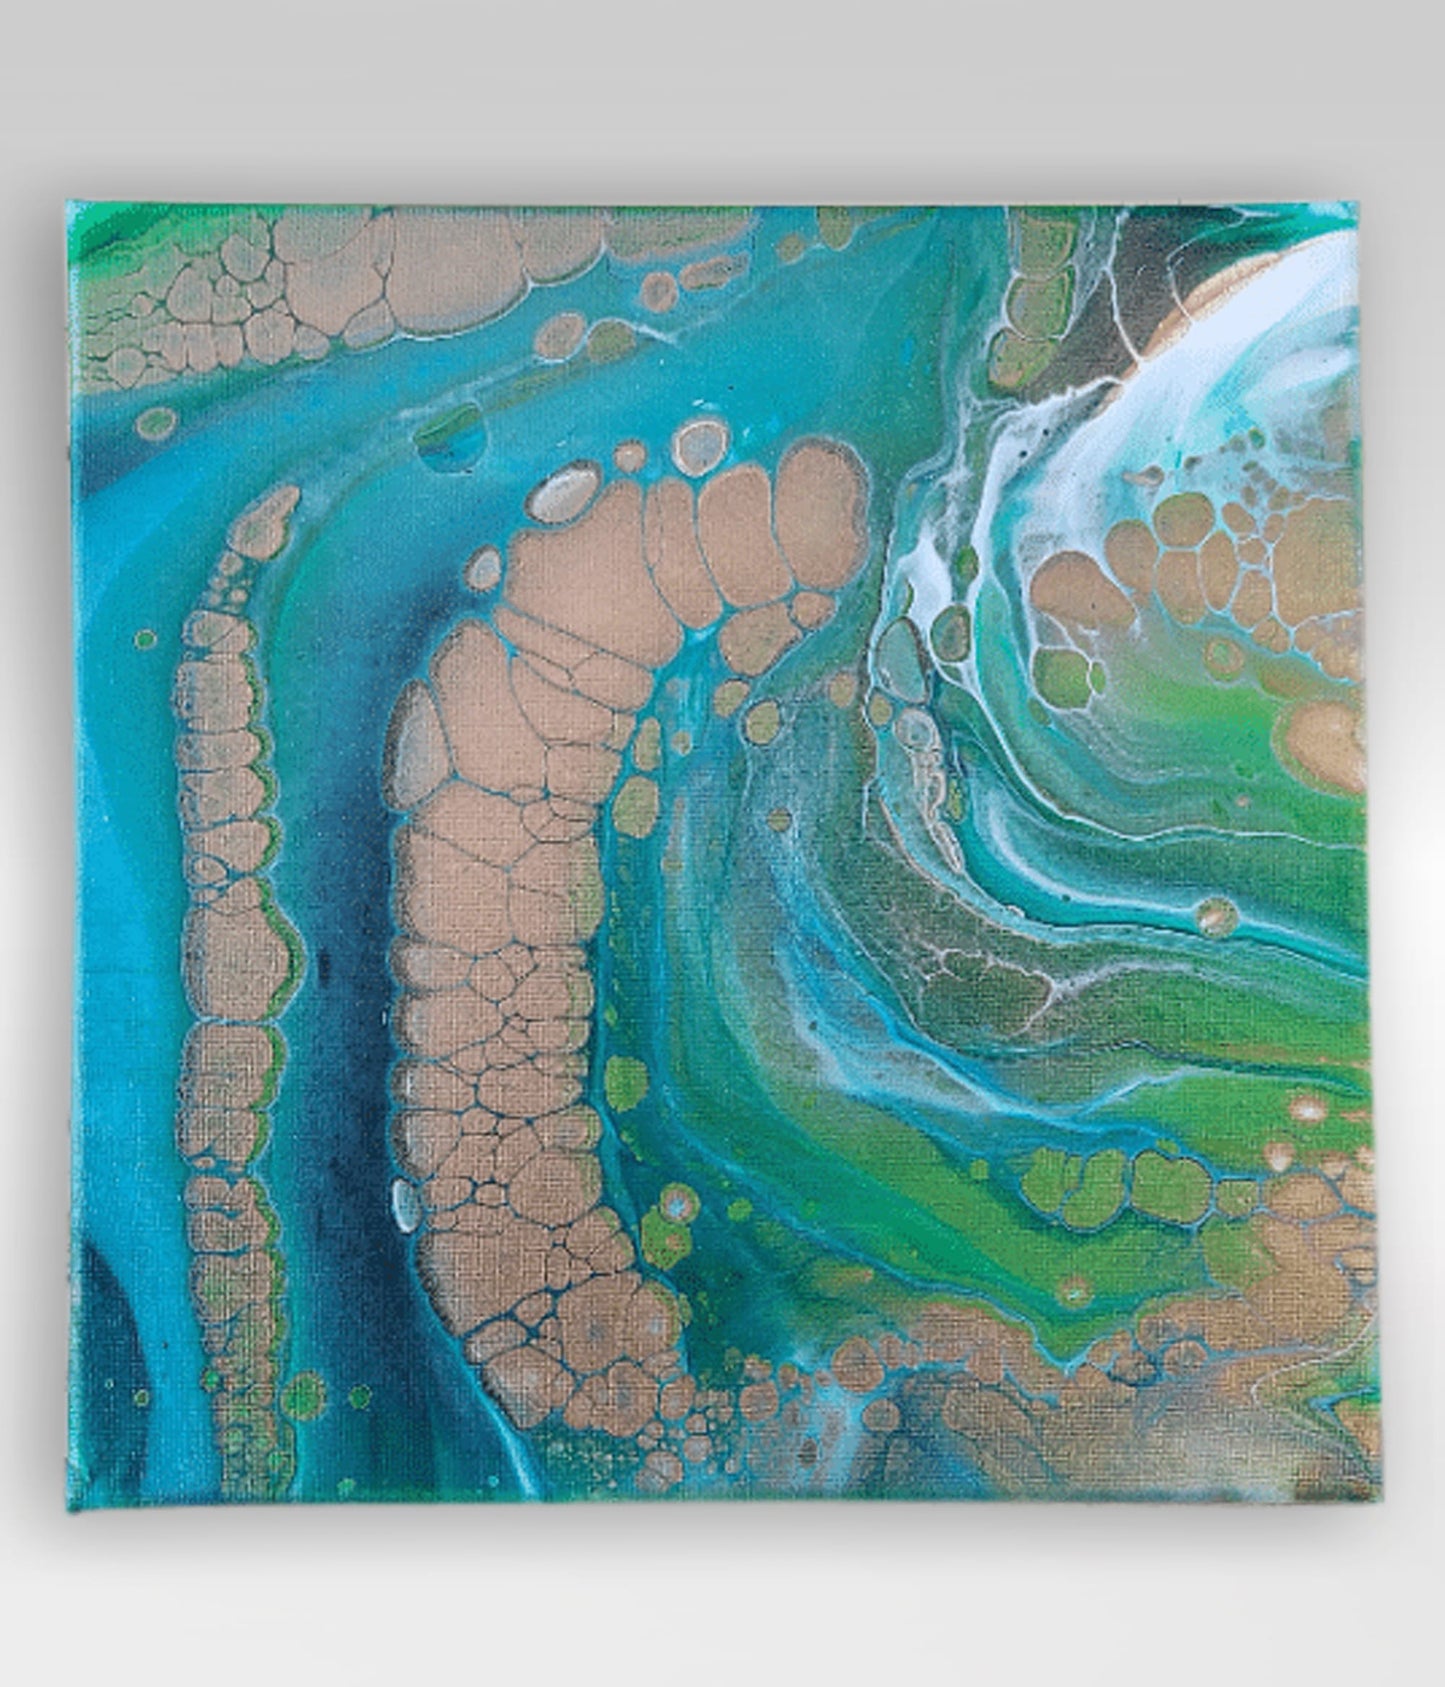 Many Paths – 10 x 10 Acrylic Pour Painting On Canvas